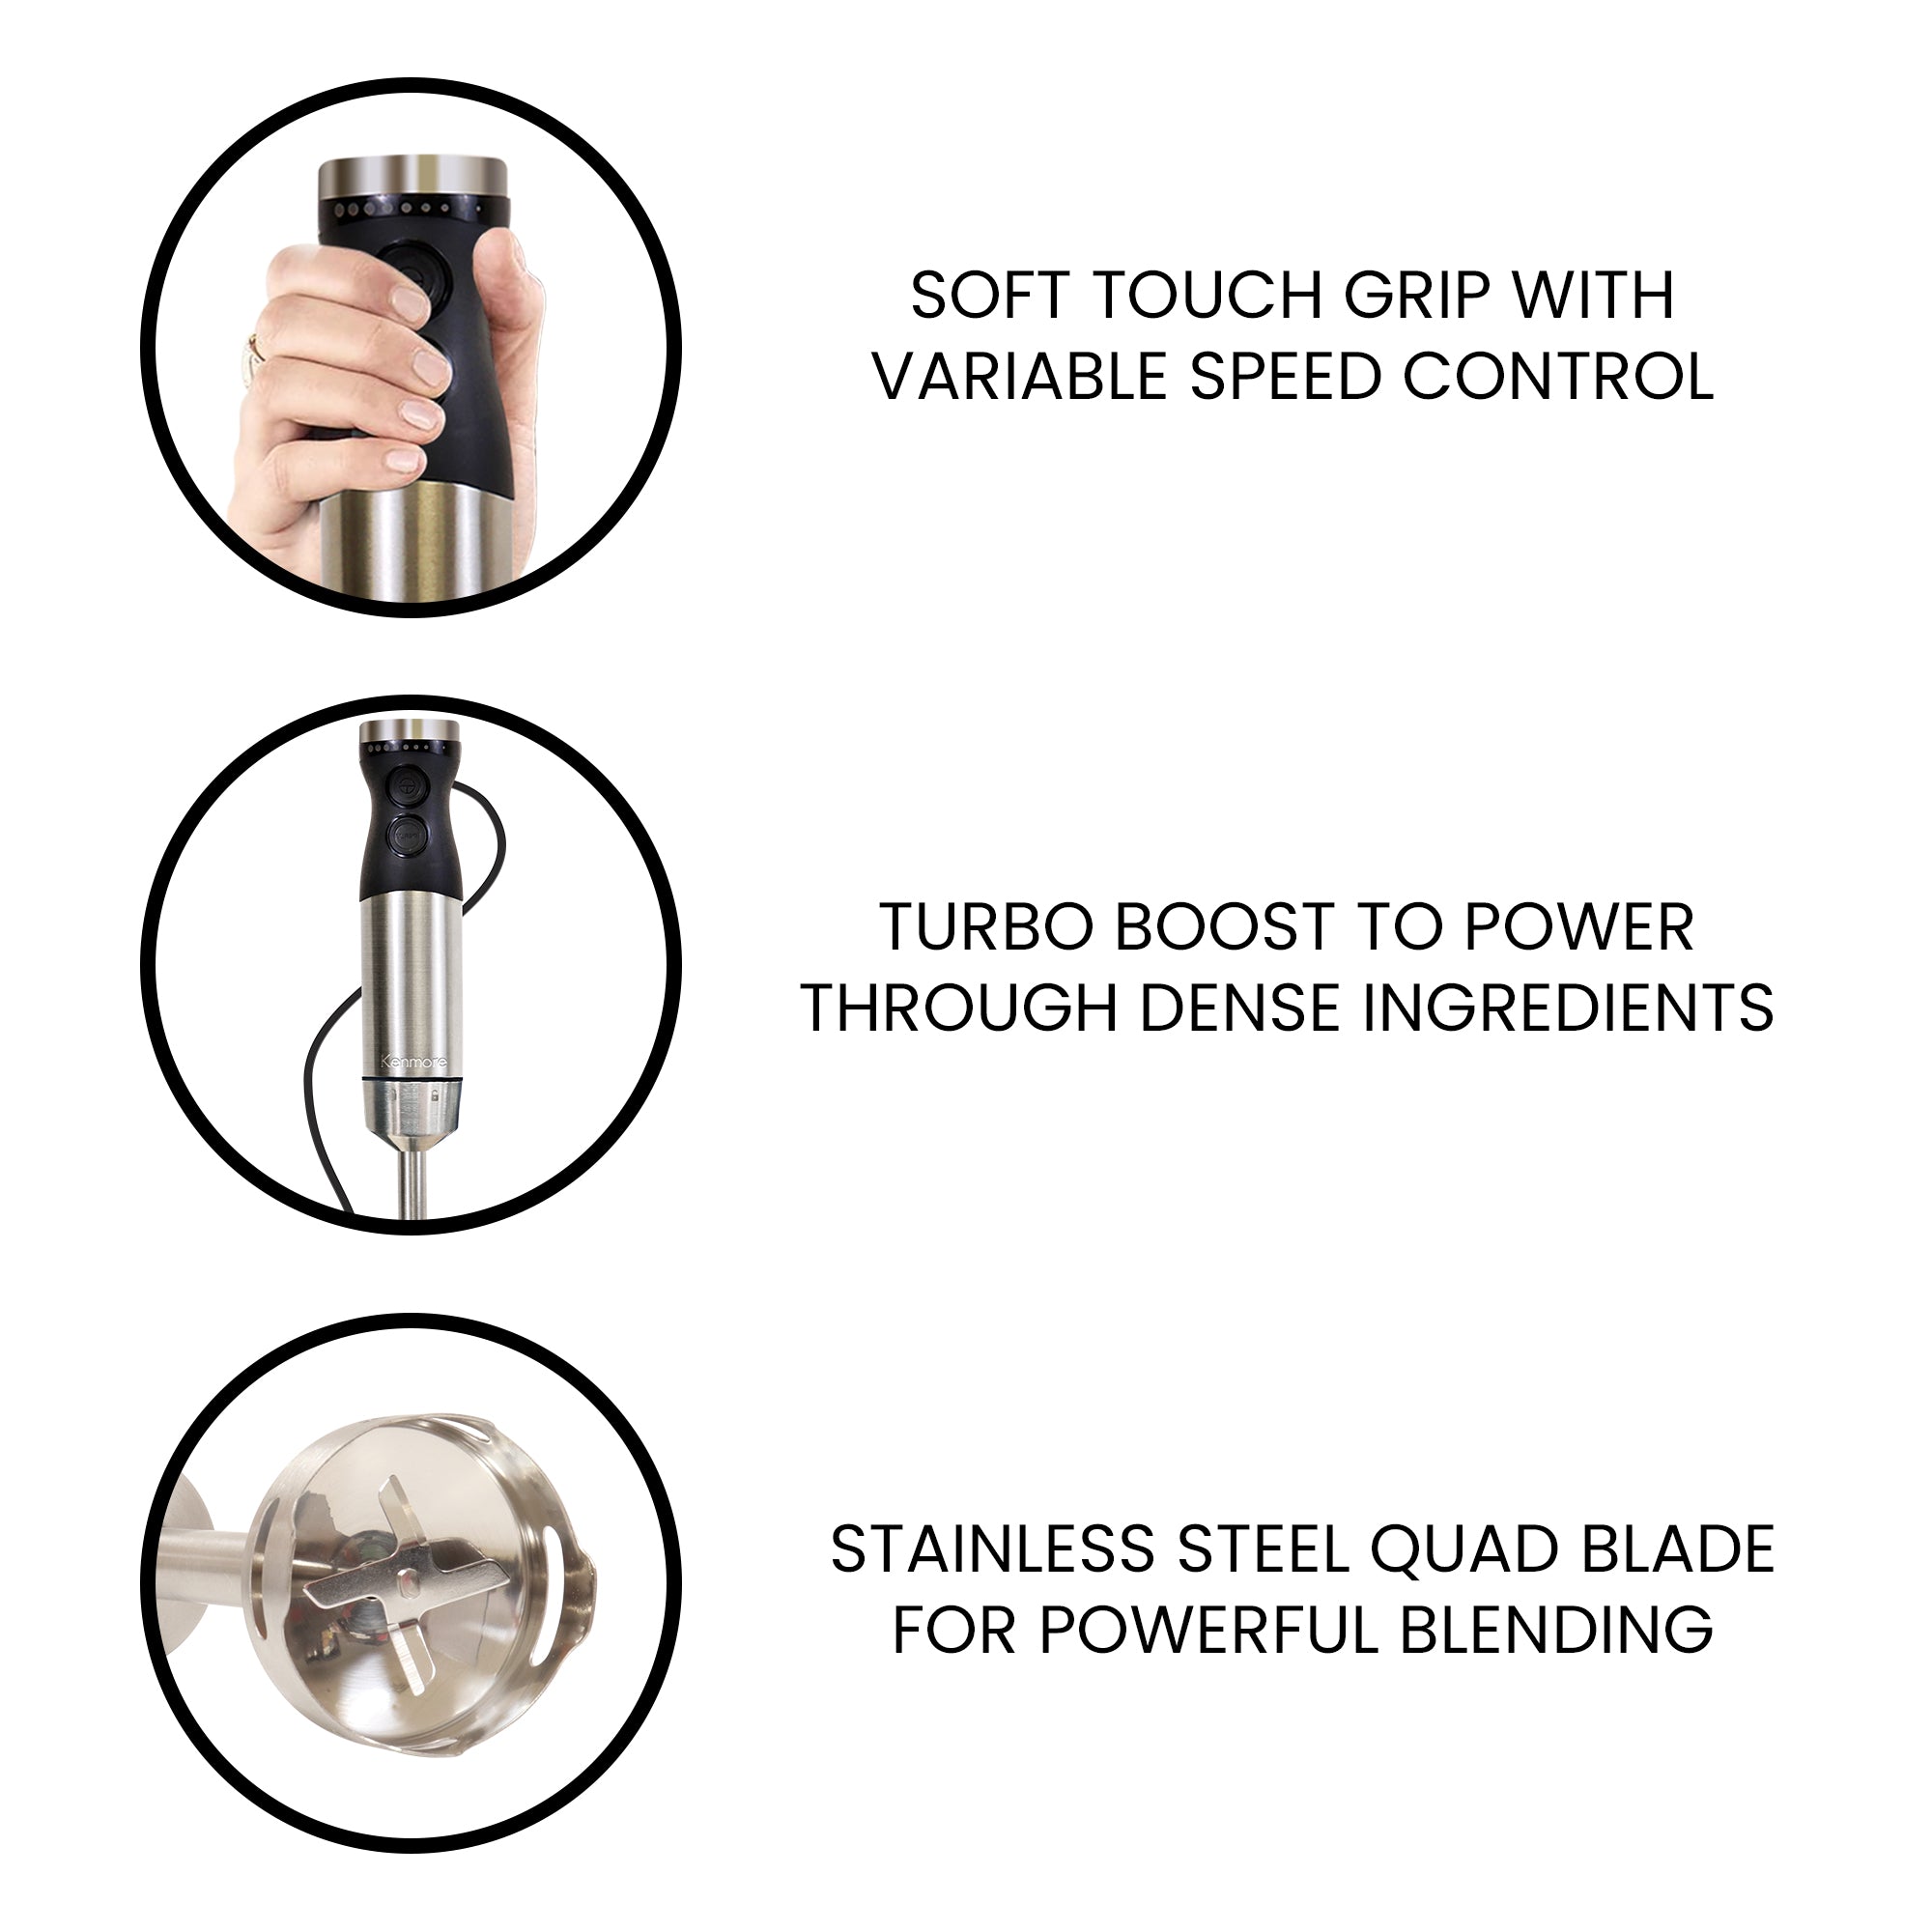 Three closeup images show features: 1. Soft touch grip with variable speed control; 2. Turbo boost to power through dense ingredients; 3. Stainless steel quad blade for powerful blending.